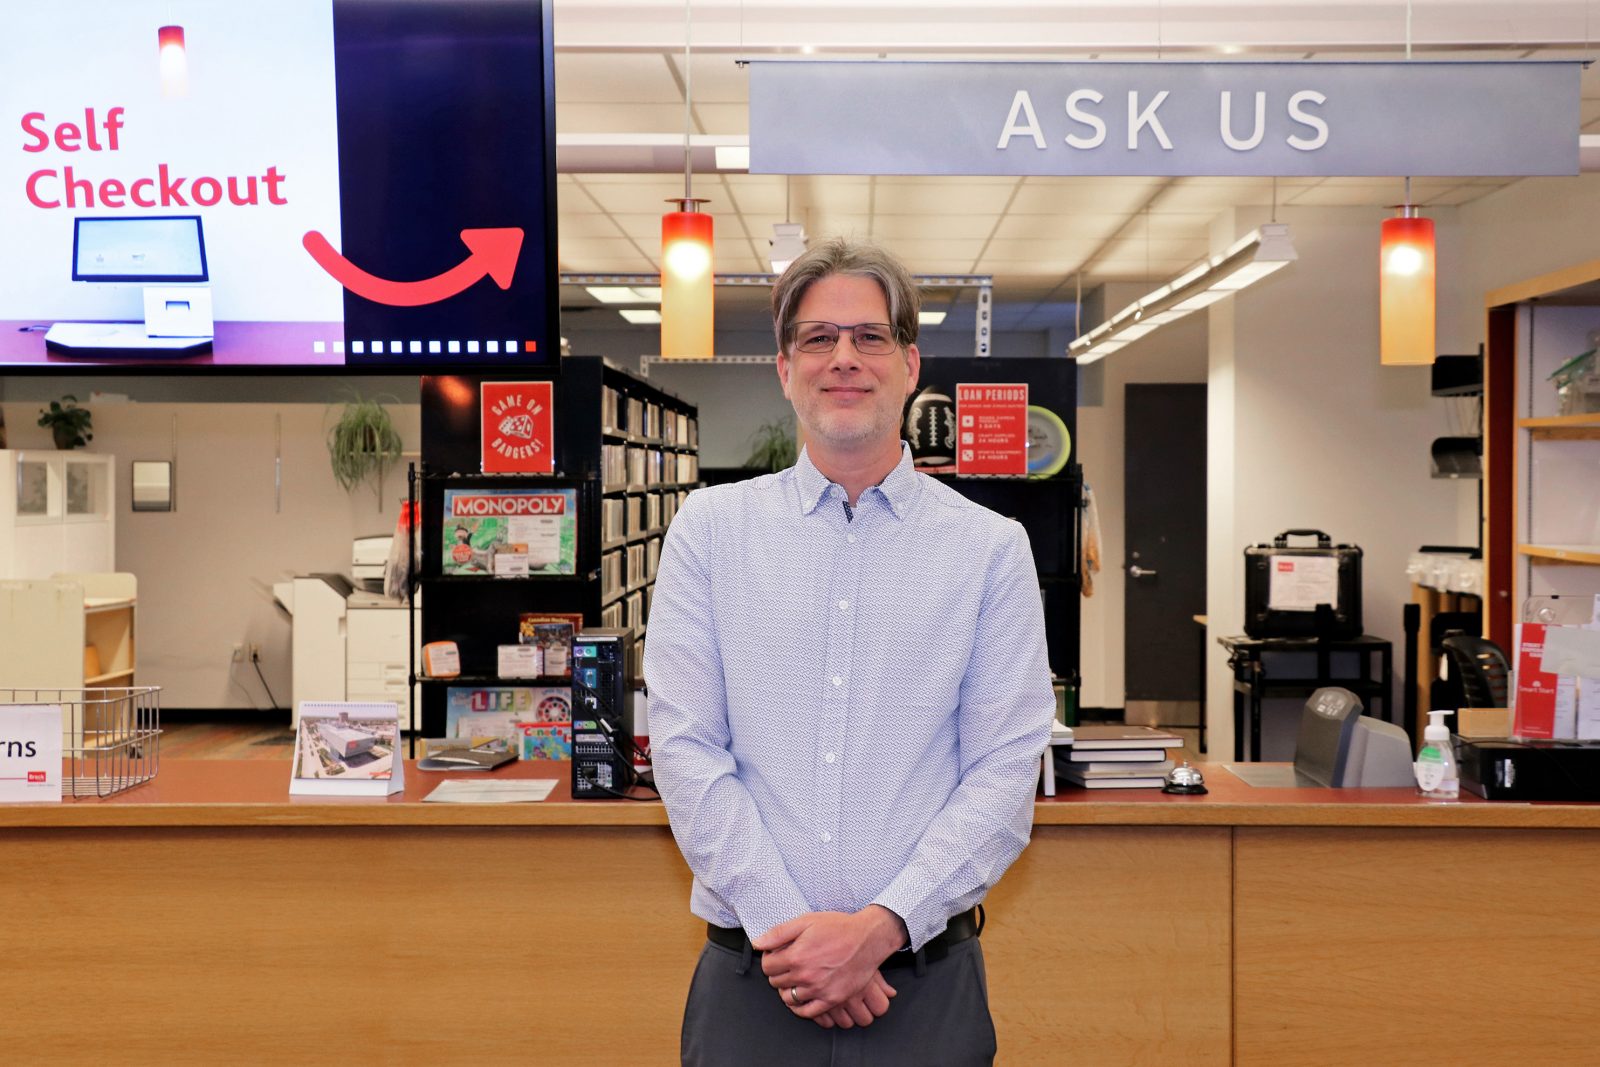 A man stands in front of a desk area in a university library. A sign above his head reads “Ask Us” and a digital screen displays instructions for where to use the self-checkout machines.